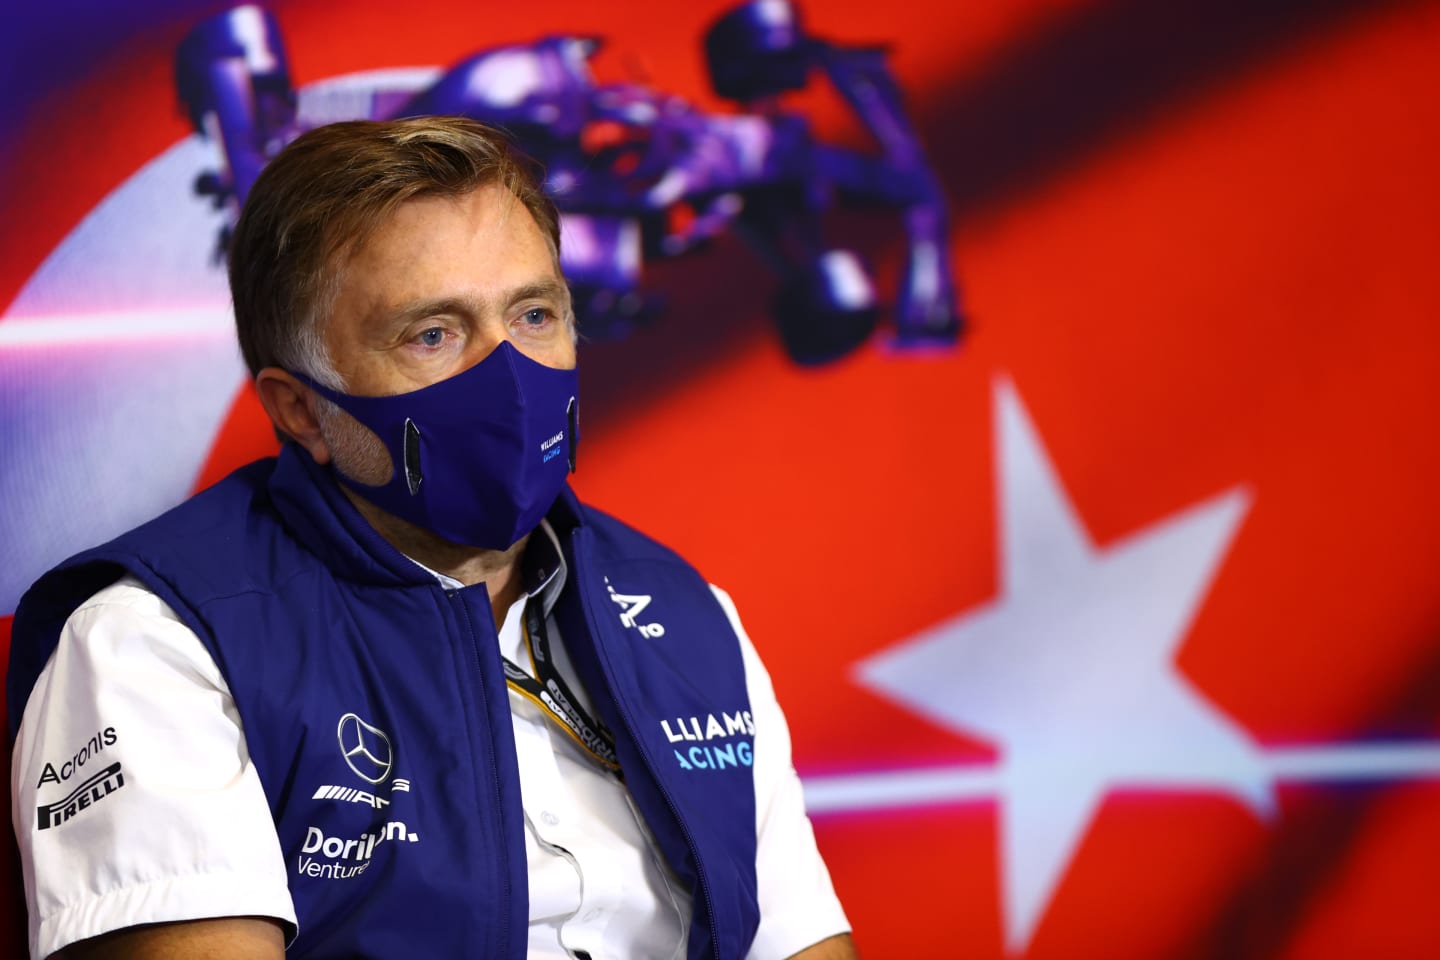 ISTANBUL, TURKEY - OCTOBER 08: Jost Capito, CEO of Williams F1 talks in the Team Principals Press Conference during practice ahead of the F1 Grand Prix of Turkey at Intercity Istanbul Park on October 08, 2021 in Istanbul, Turkey. (Photo by Dan Istitene/Getty Images)